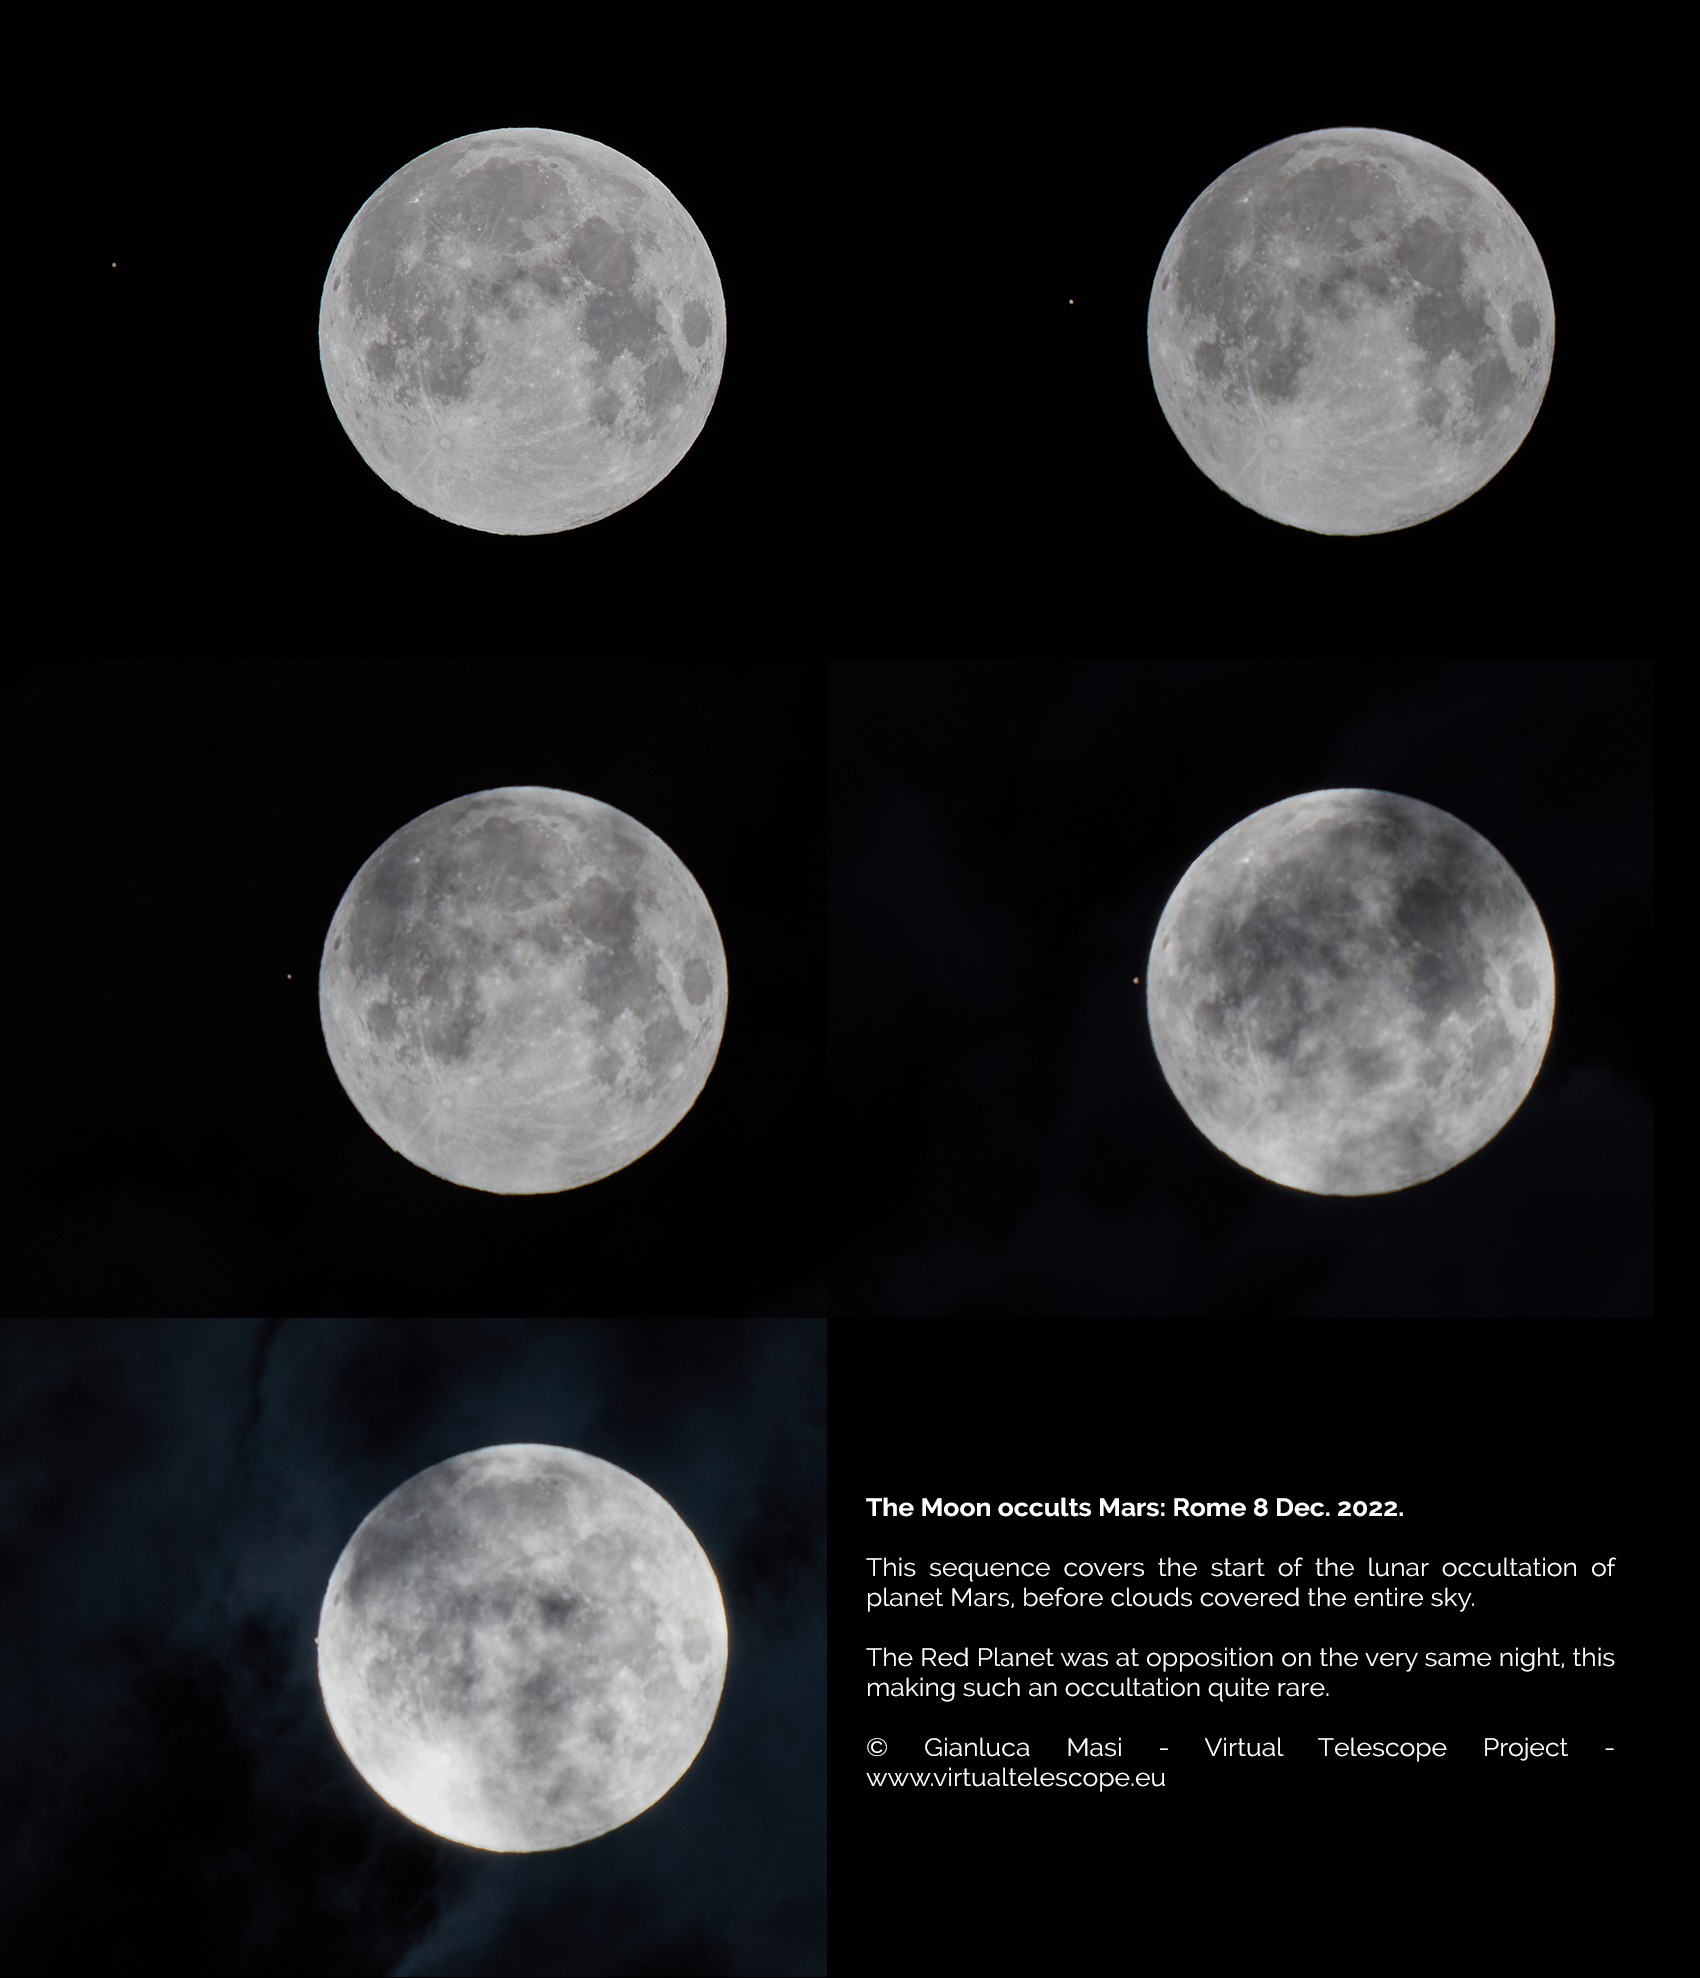 The 8 Dec. 2022 occultation of Mars by the Moon: a sequence.